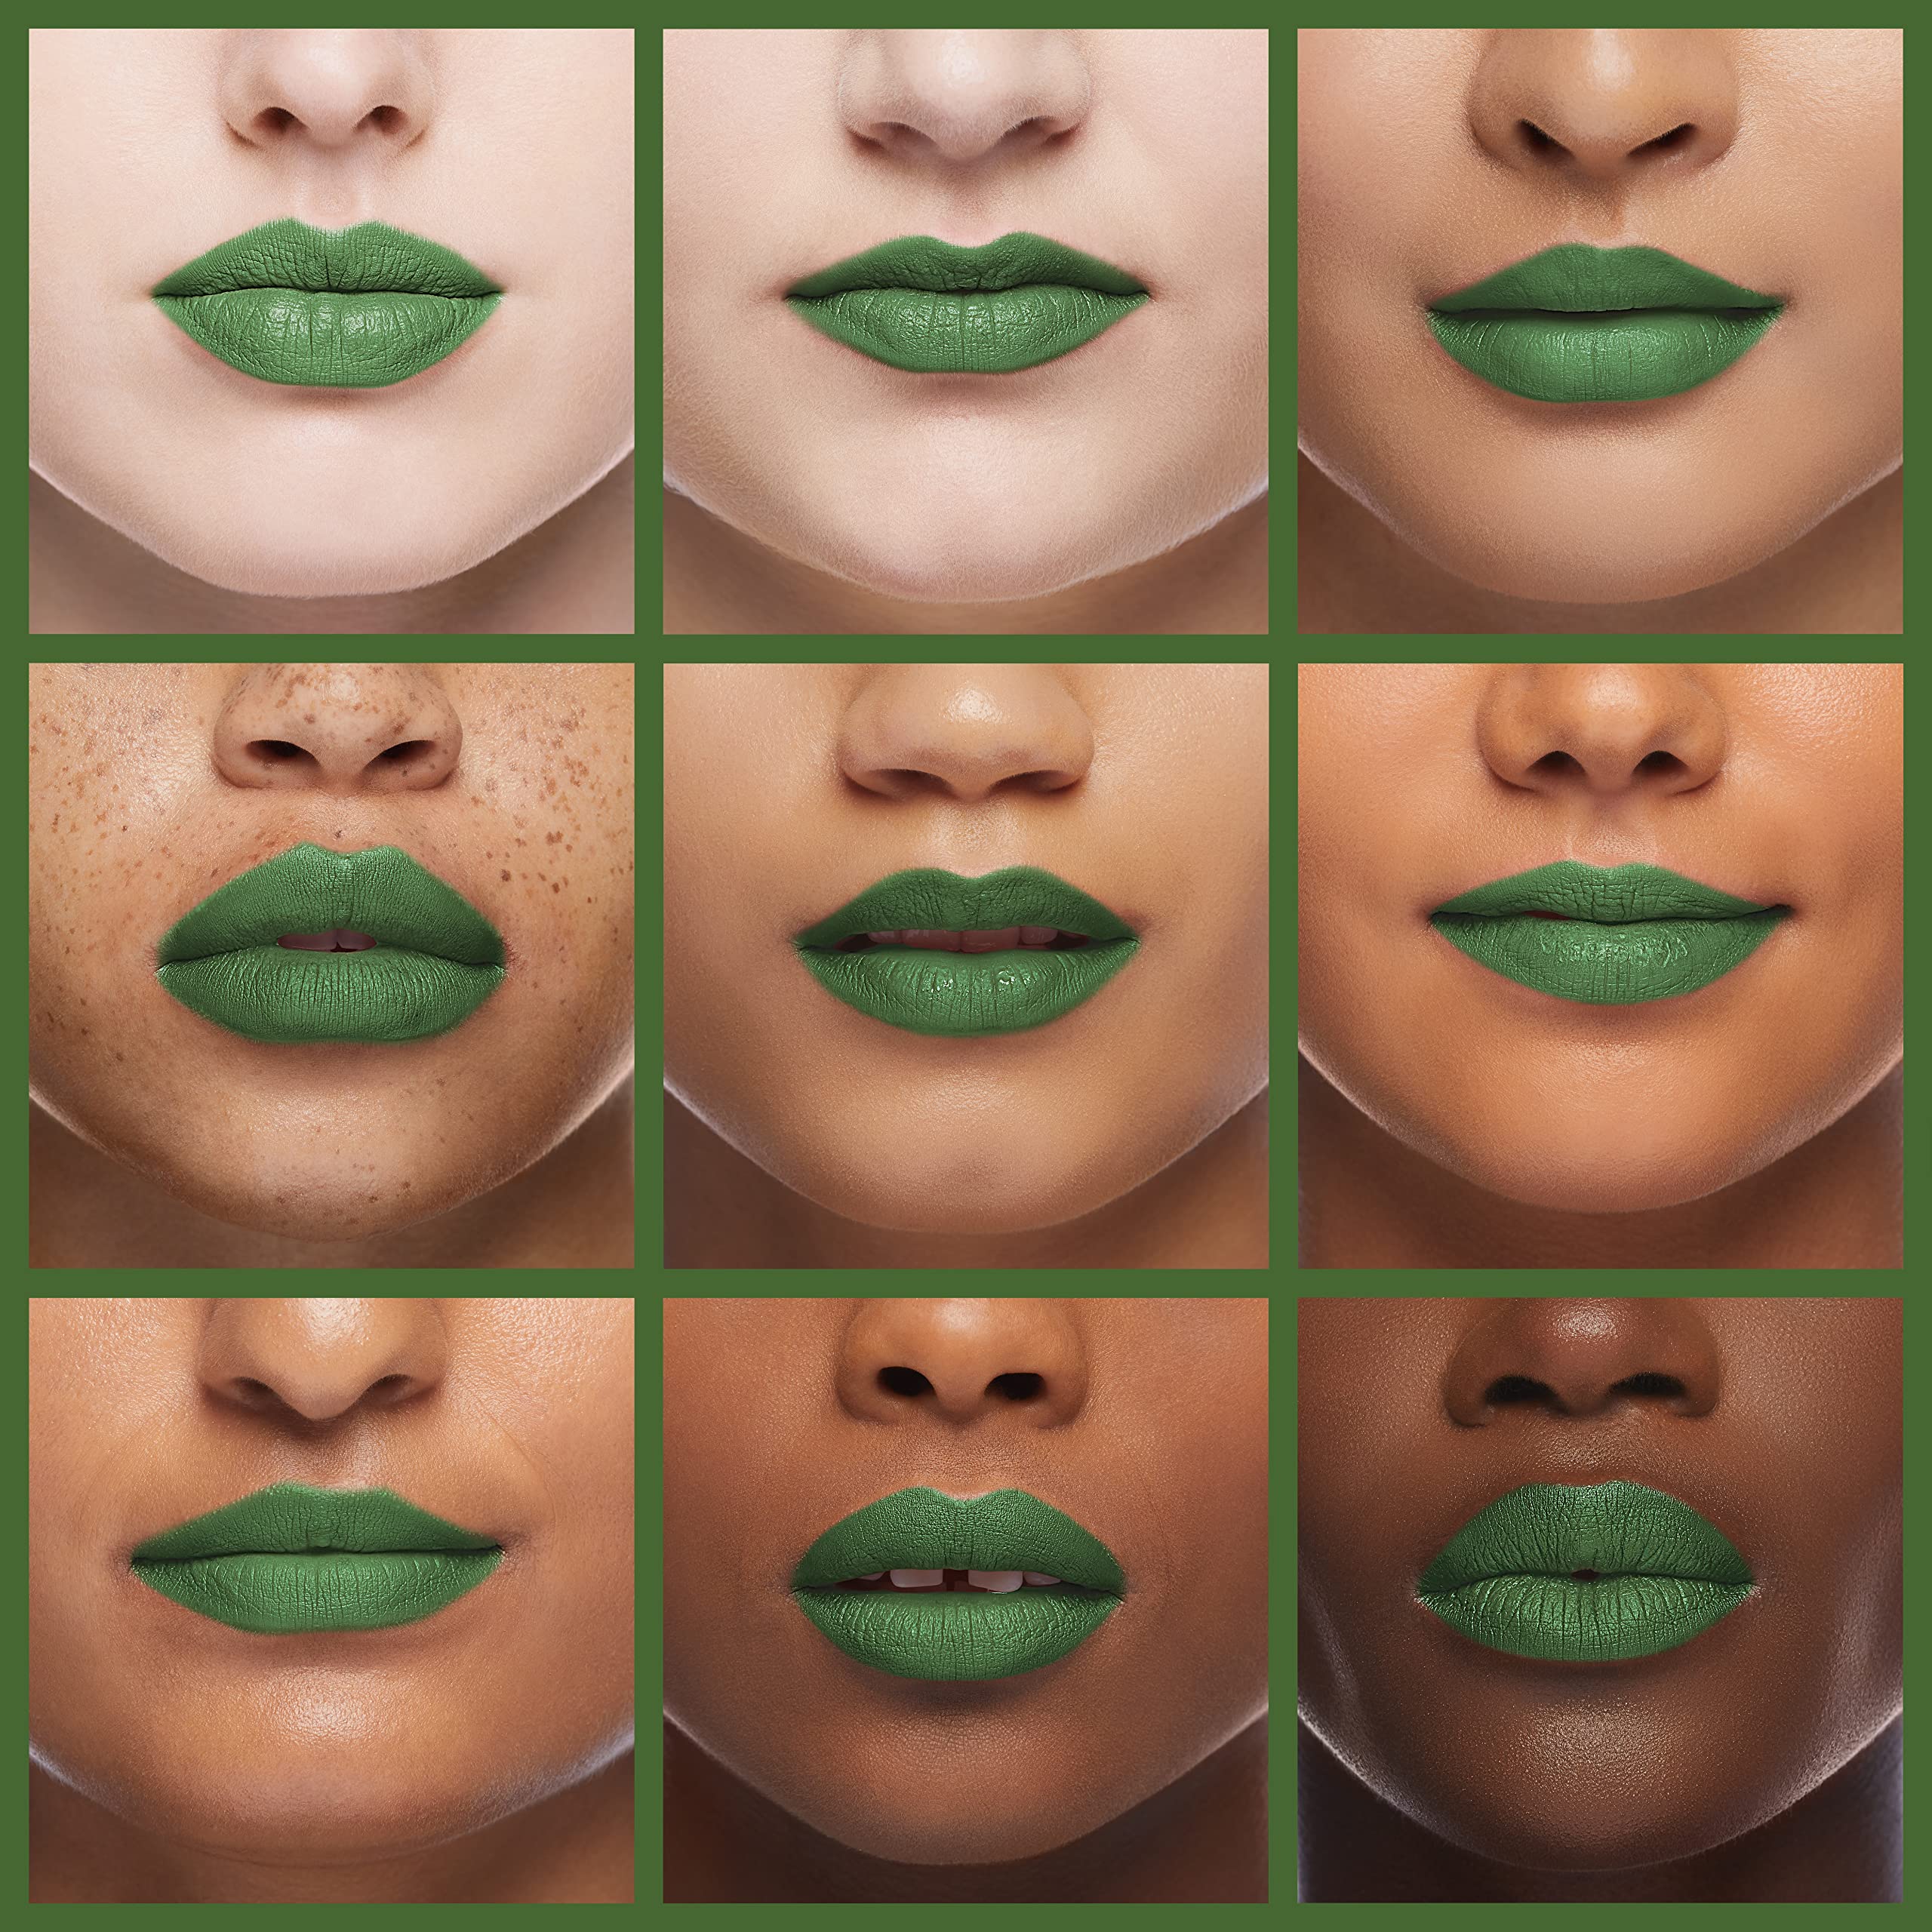 How to make green lipstick